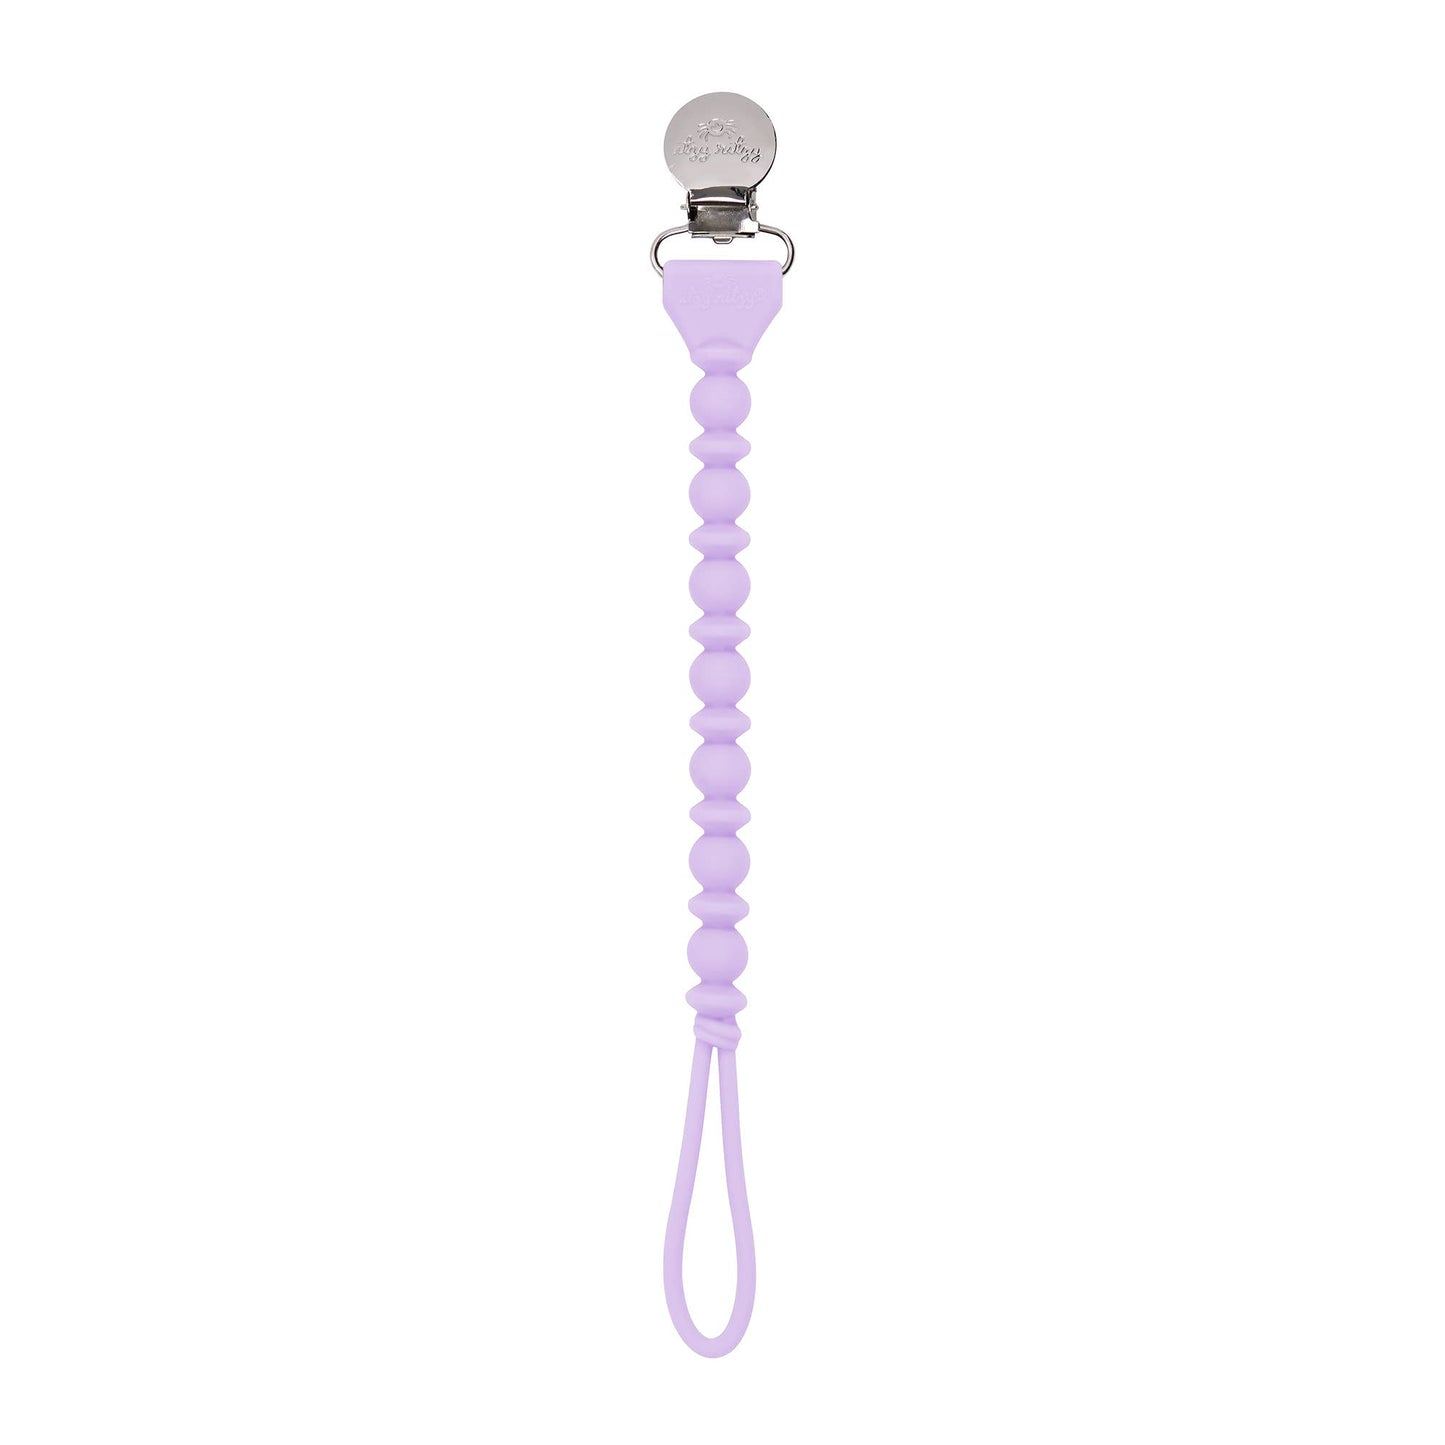 Sweetie Strap™ Silicone One-Piece Pacifier Clip - Purple